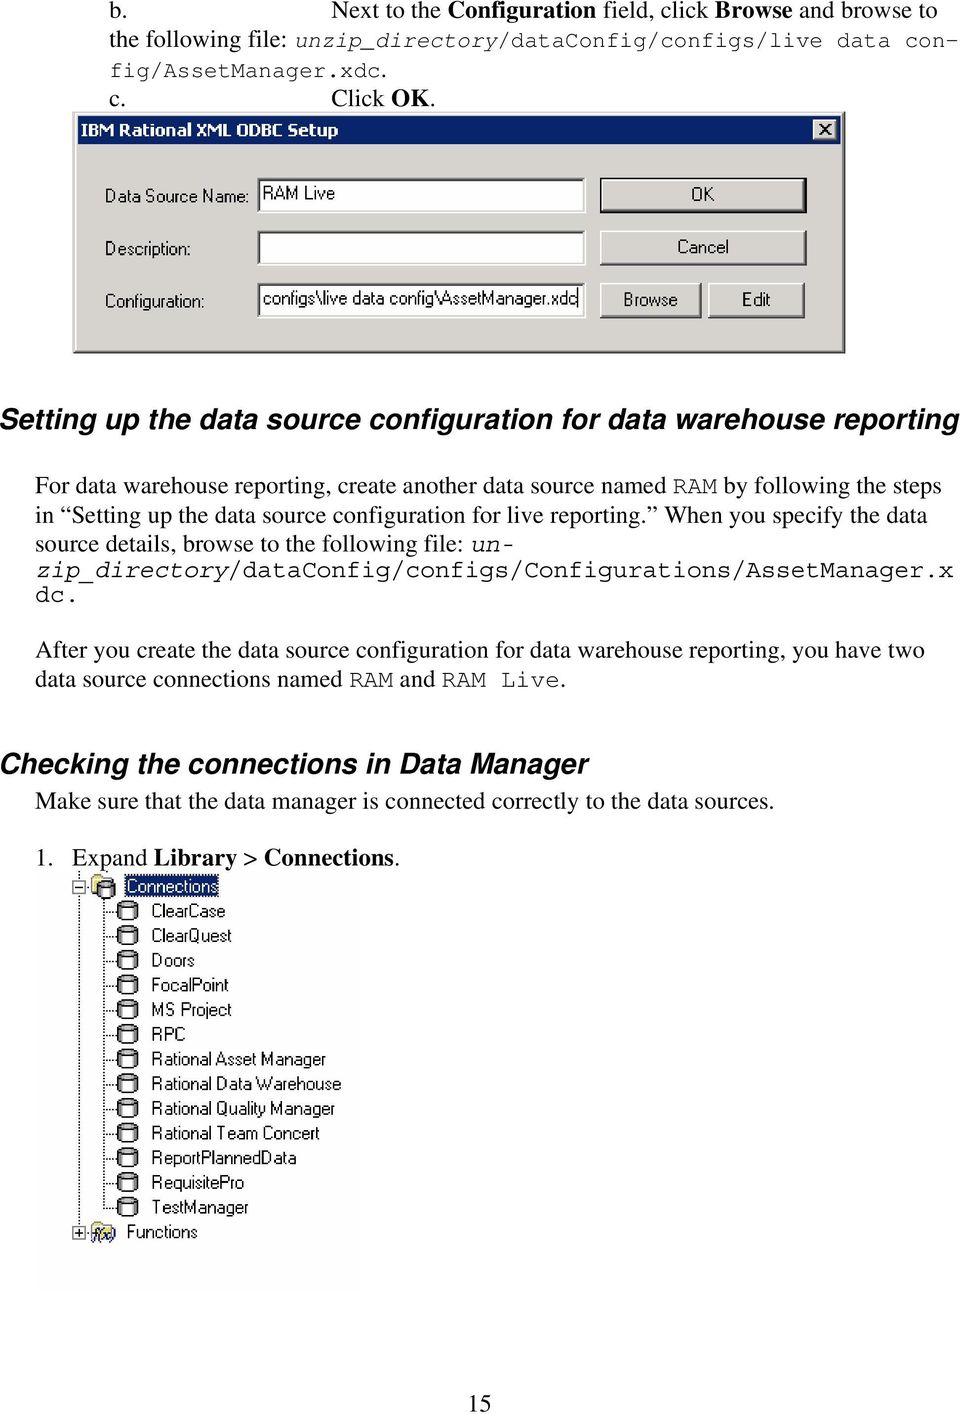 configuration for live reporting. When you specify the data source details, browse to the following file: unzip_directory/dataconfig/configs/configurations/assetmanager.x dc.